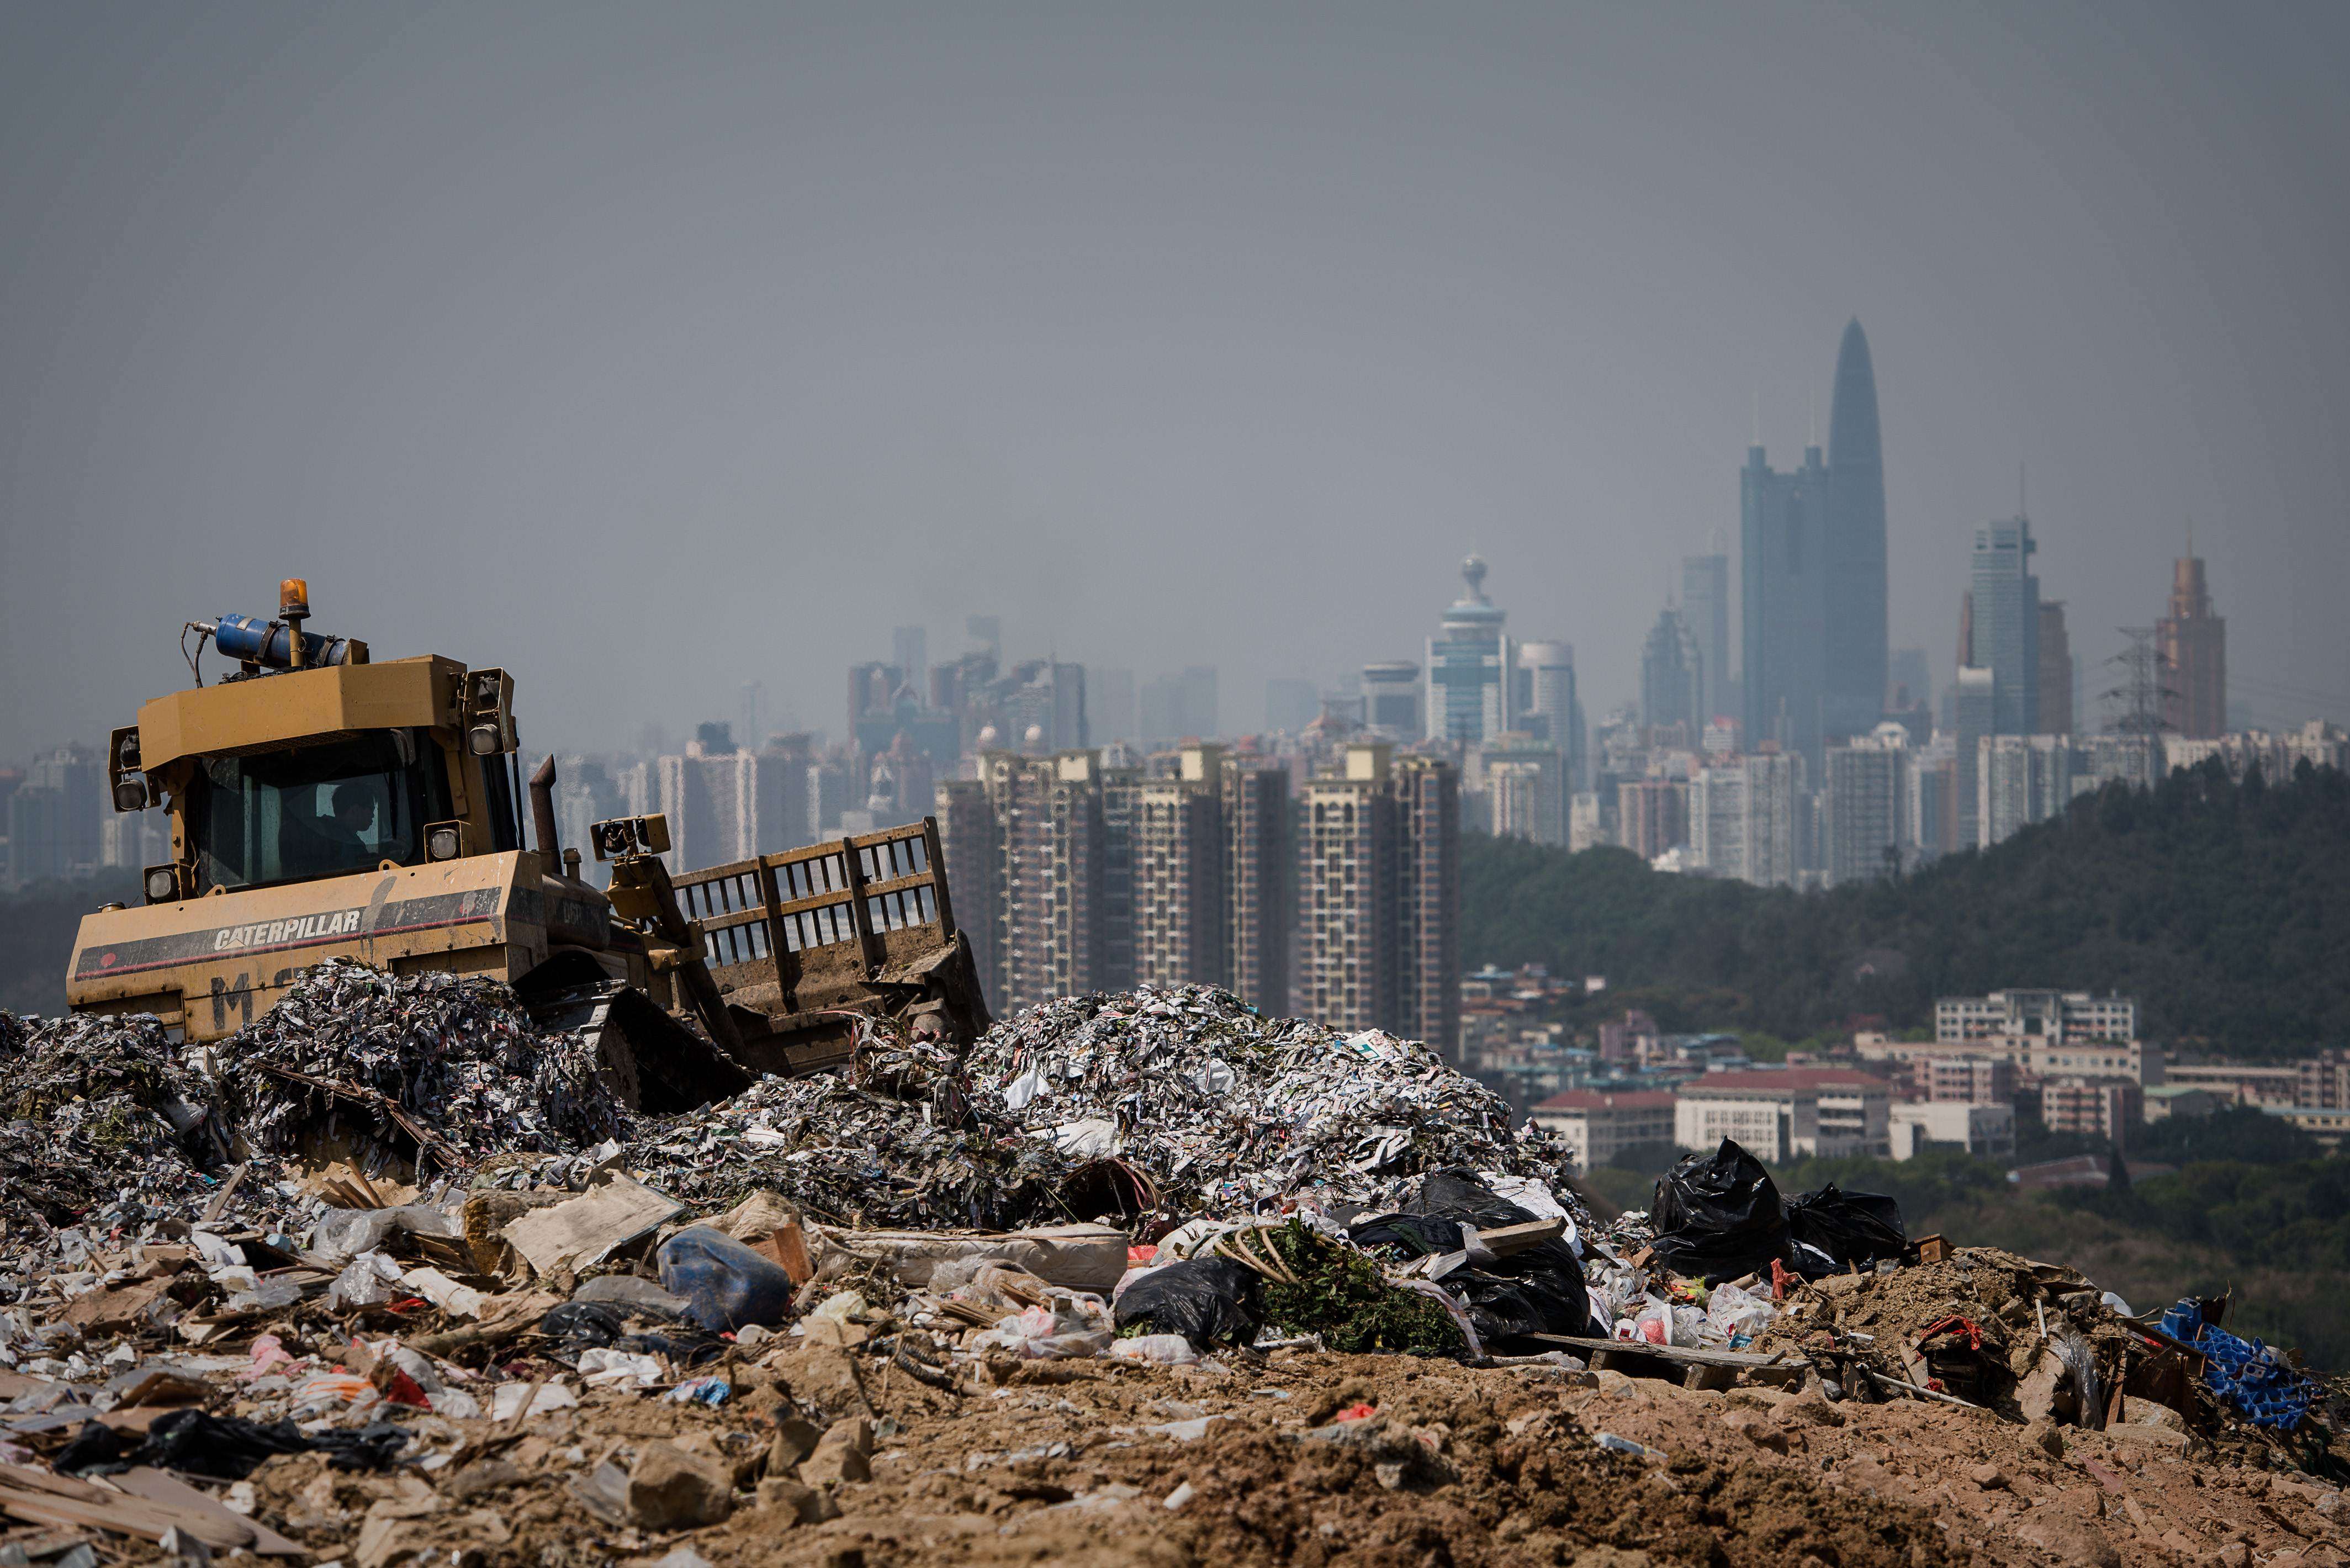 Shenzhen tower blocks loom over a landfill in the New Territories, Hong Kong. Nearly 40 per cent of the city’s municipal solid waste is composed of food. Photo: AFP